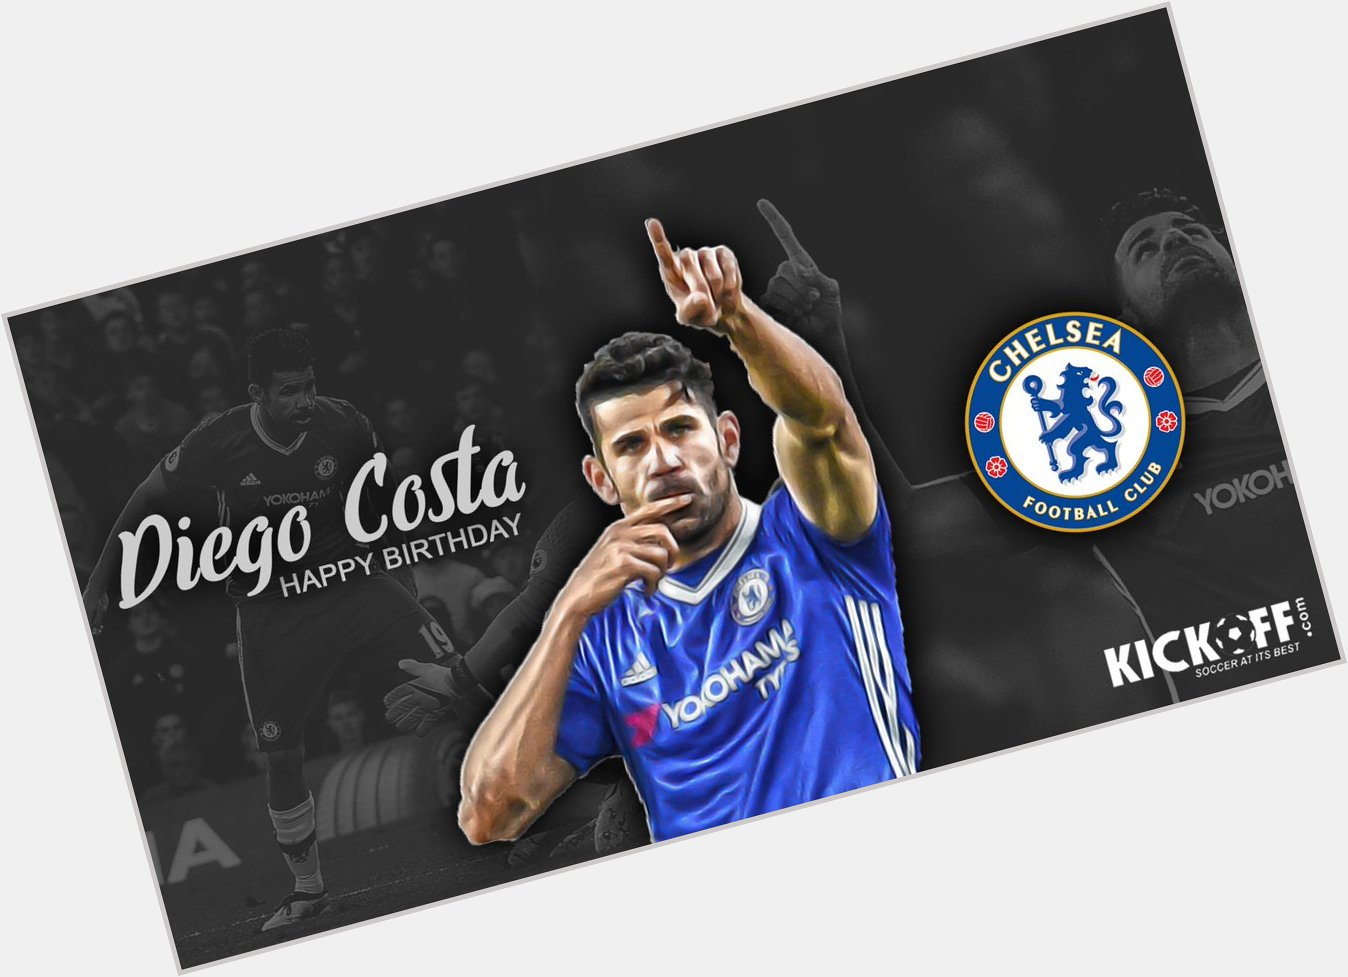 In January he will officially be moving to Atletico Madrid. Join us in wishing Diego Costa a Happy Birthday! 